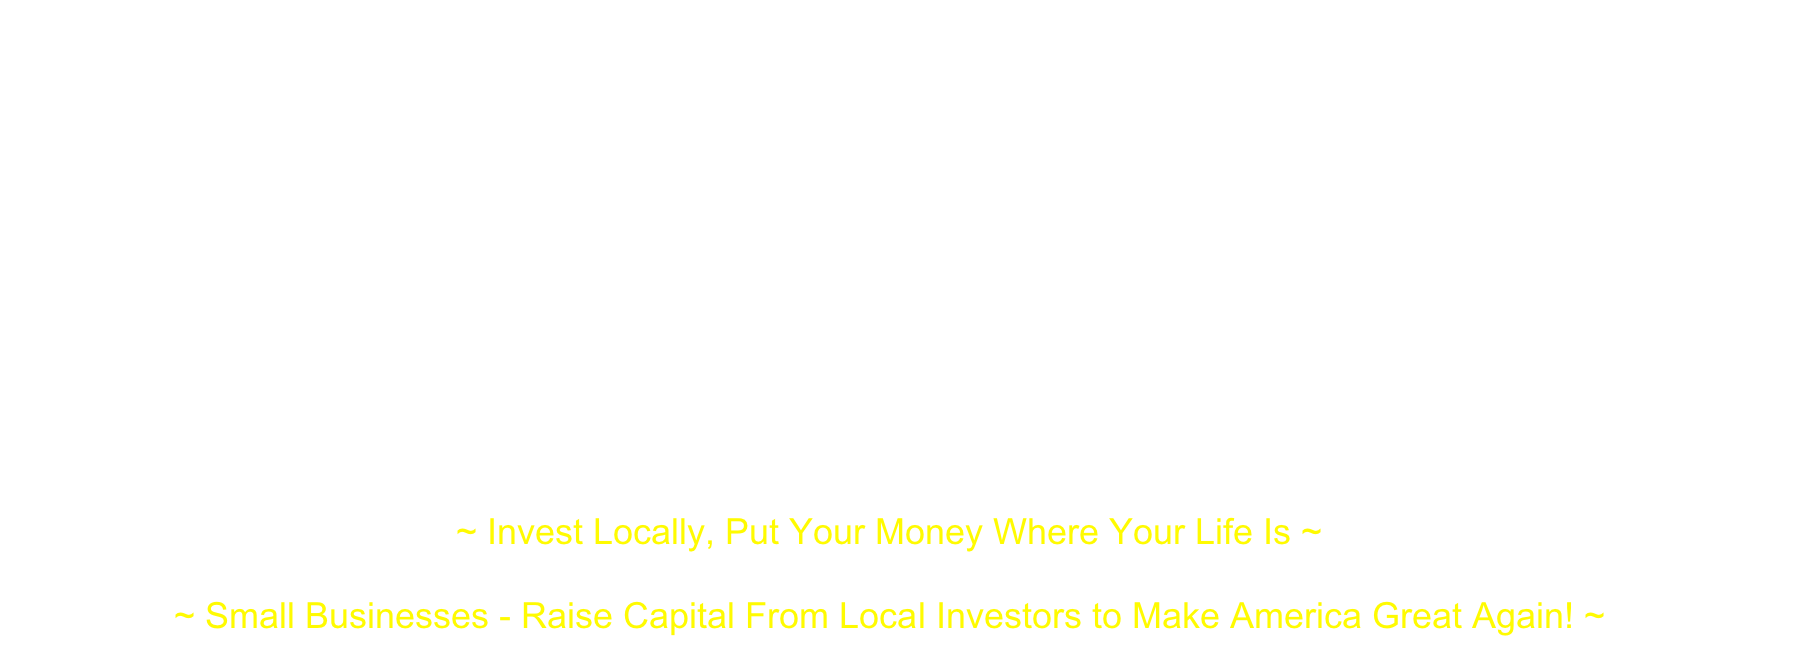  Turned off by what they see as the failures of traditional finance, a new breed of investor is turning to small investment clubs and networks through which they can make loans, equity investments or a little of both in “Local” (city, town, county or a defined primary statistical area) nearby businesses…This is a way for both sophisticated and small (non-accredited) investors to put their money in Main Street businesses and help them grow ~ “The Local Small Business Investing Revolution” - www.cnbc.com/2016/02/16/reaping-profits-in-the-local-investing-revolution-in-us.html  "All told, against an otherwise difficult investing backdrop, the rewards of investing ‘local’ outweigh the risks - Small business investments offer a unique opportunity to generate attractive returns that are less correlated to public stock and bond markets." ~ “Invest Local” - www.huffingtonpost.com/kevin-harmon/invest-local_b_7586582.html “Entrepreneurs and their small enterprises are responsible for almost all the economic growth of the United States” ~ Ronald Reagan“Make America Small Business Great Again!” ~ President Donald Trump ~ Invest Locally, Put Your Money Where Your Life Is ~  ~ Small Businesses - Raise Capital From Local Investors to Make America Great Again! ~